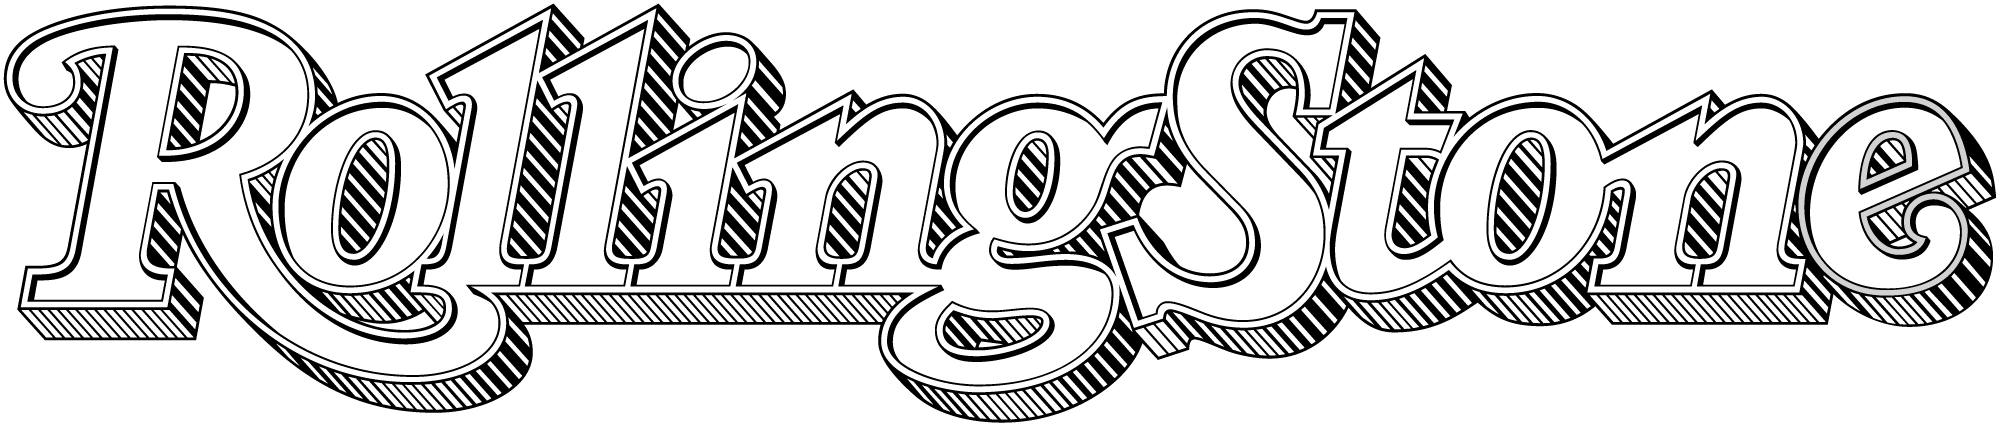 Rolling-Stone-logo-1981.png